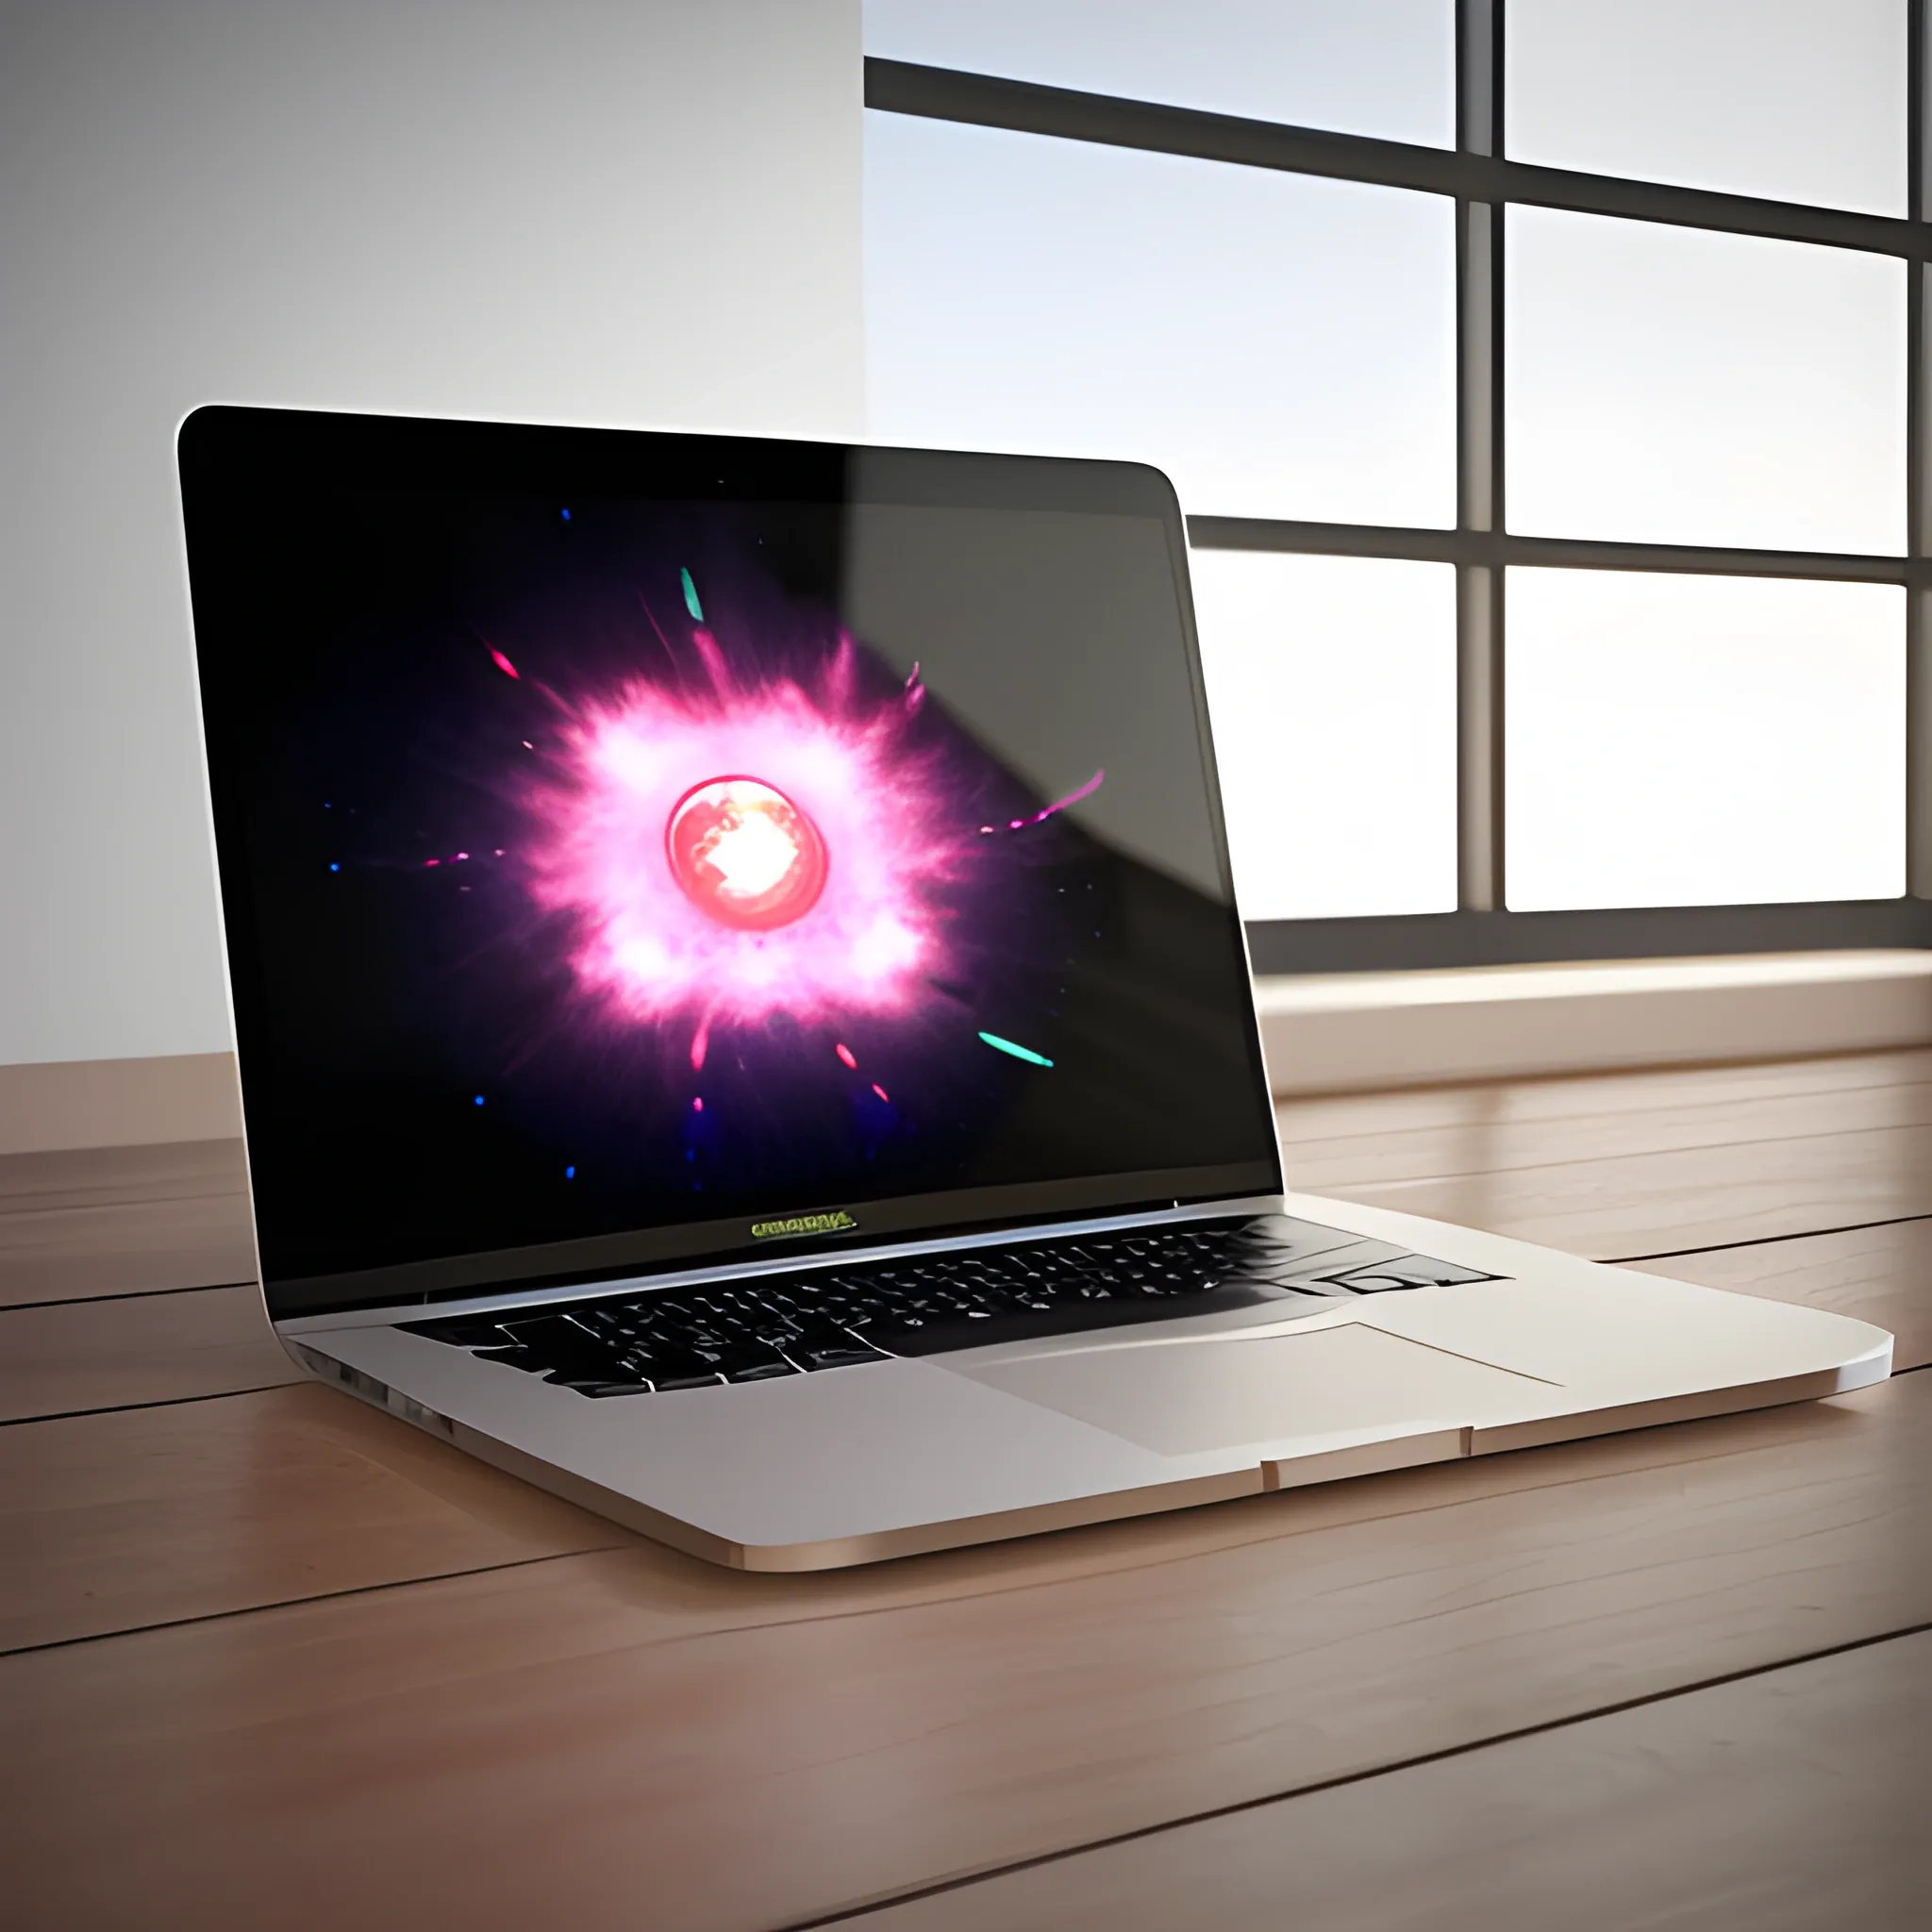 photorealistic image of a macbook with bloom effect, unreal engine, 3d